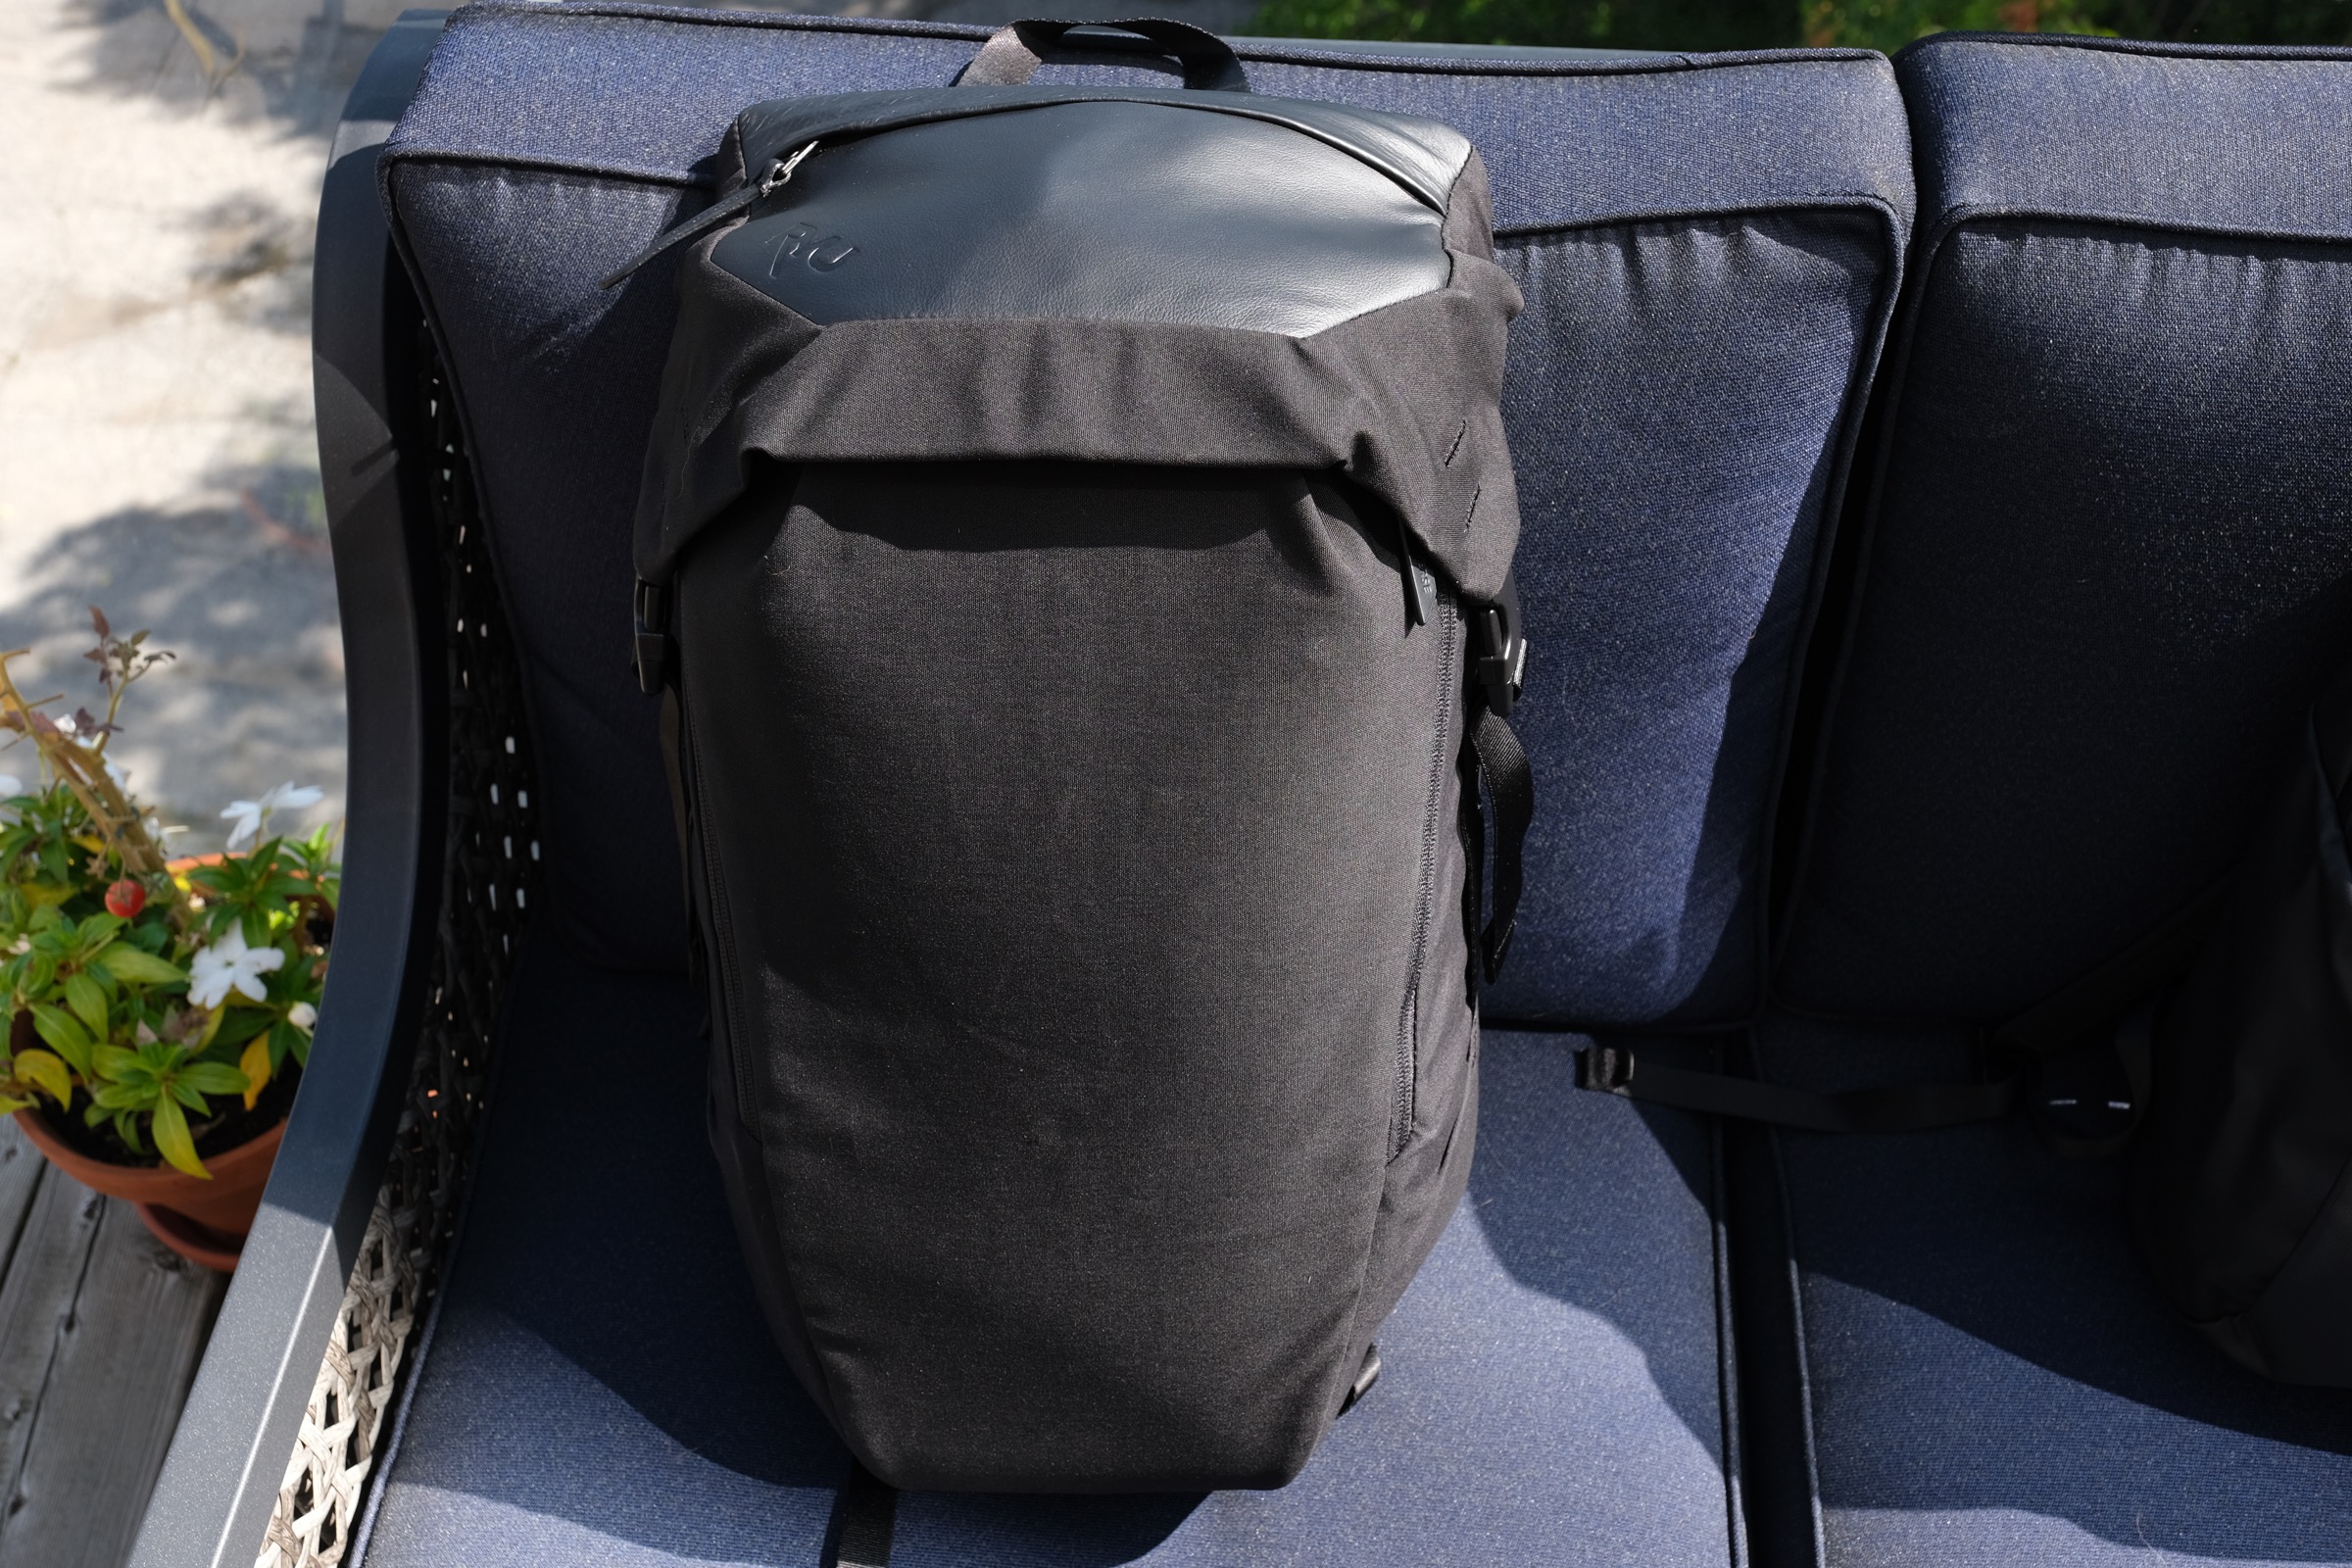 Ryu S Line Of Backpacks Offer Style And Function For Exploring The